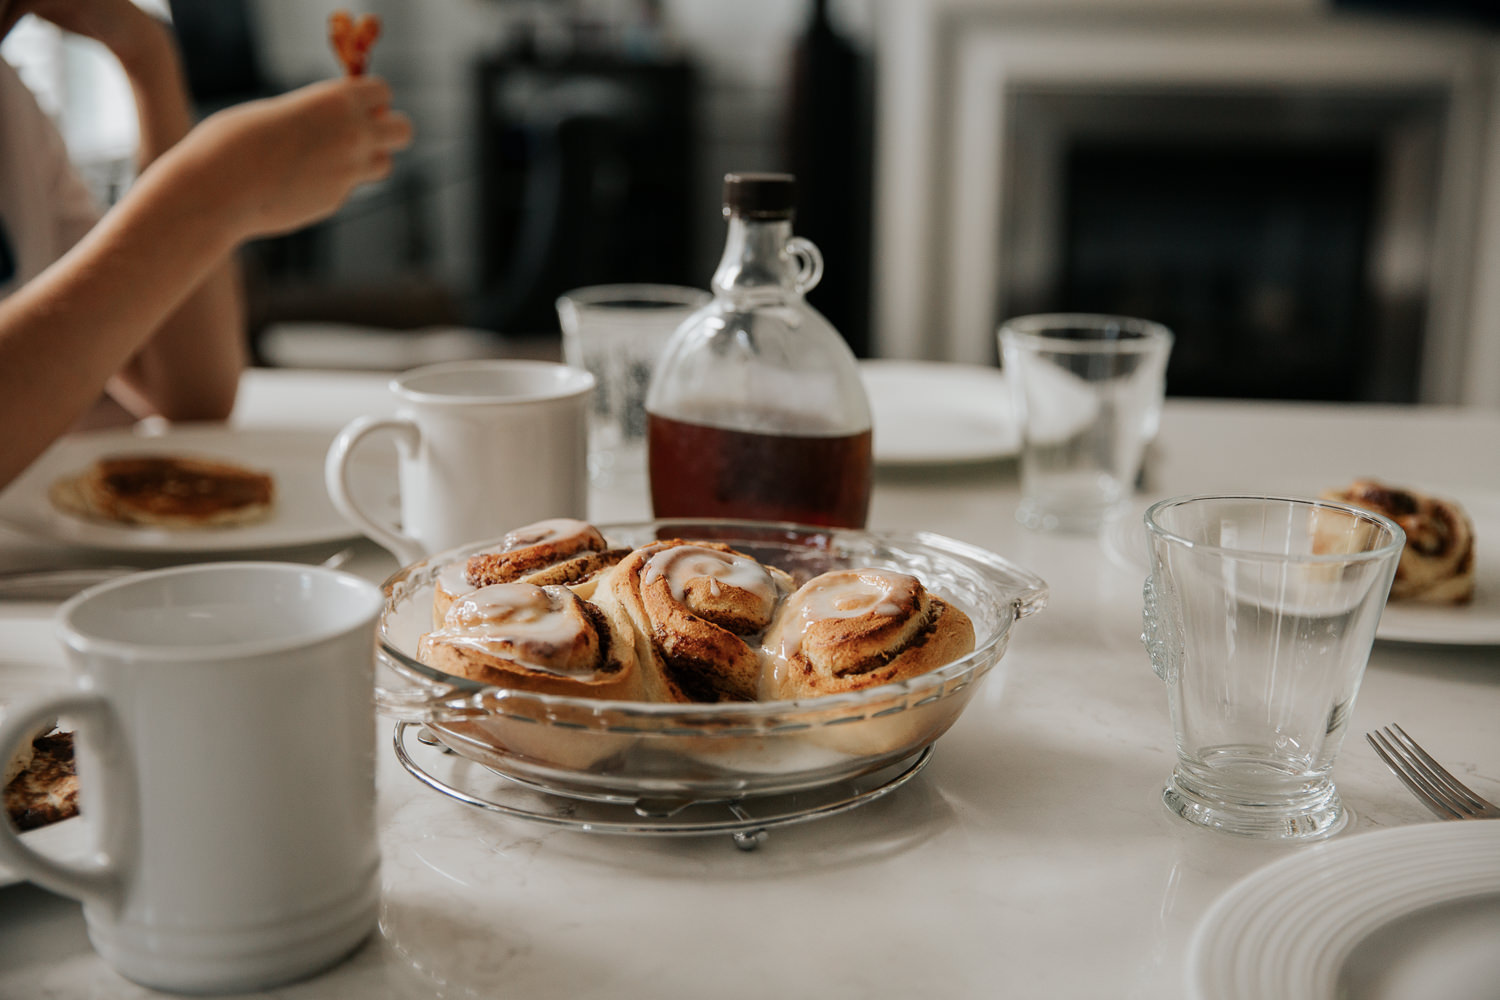 cinnamon buns covered in icing sitting in glass pie dish on table for family brunch - Newmarket Lifestyle Photos